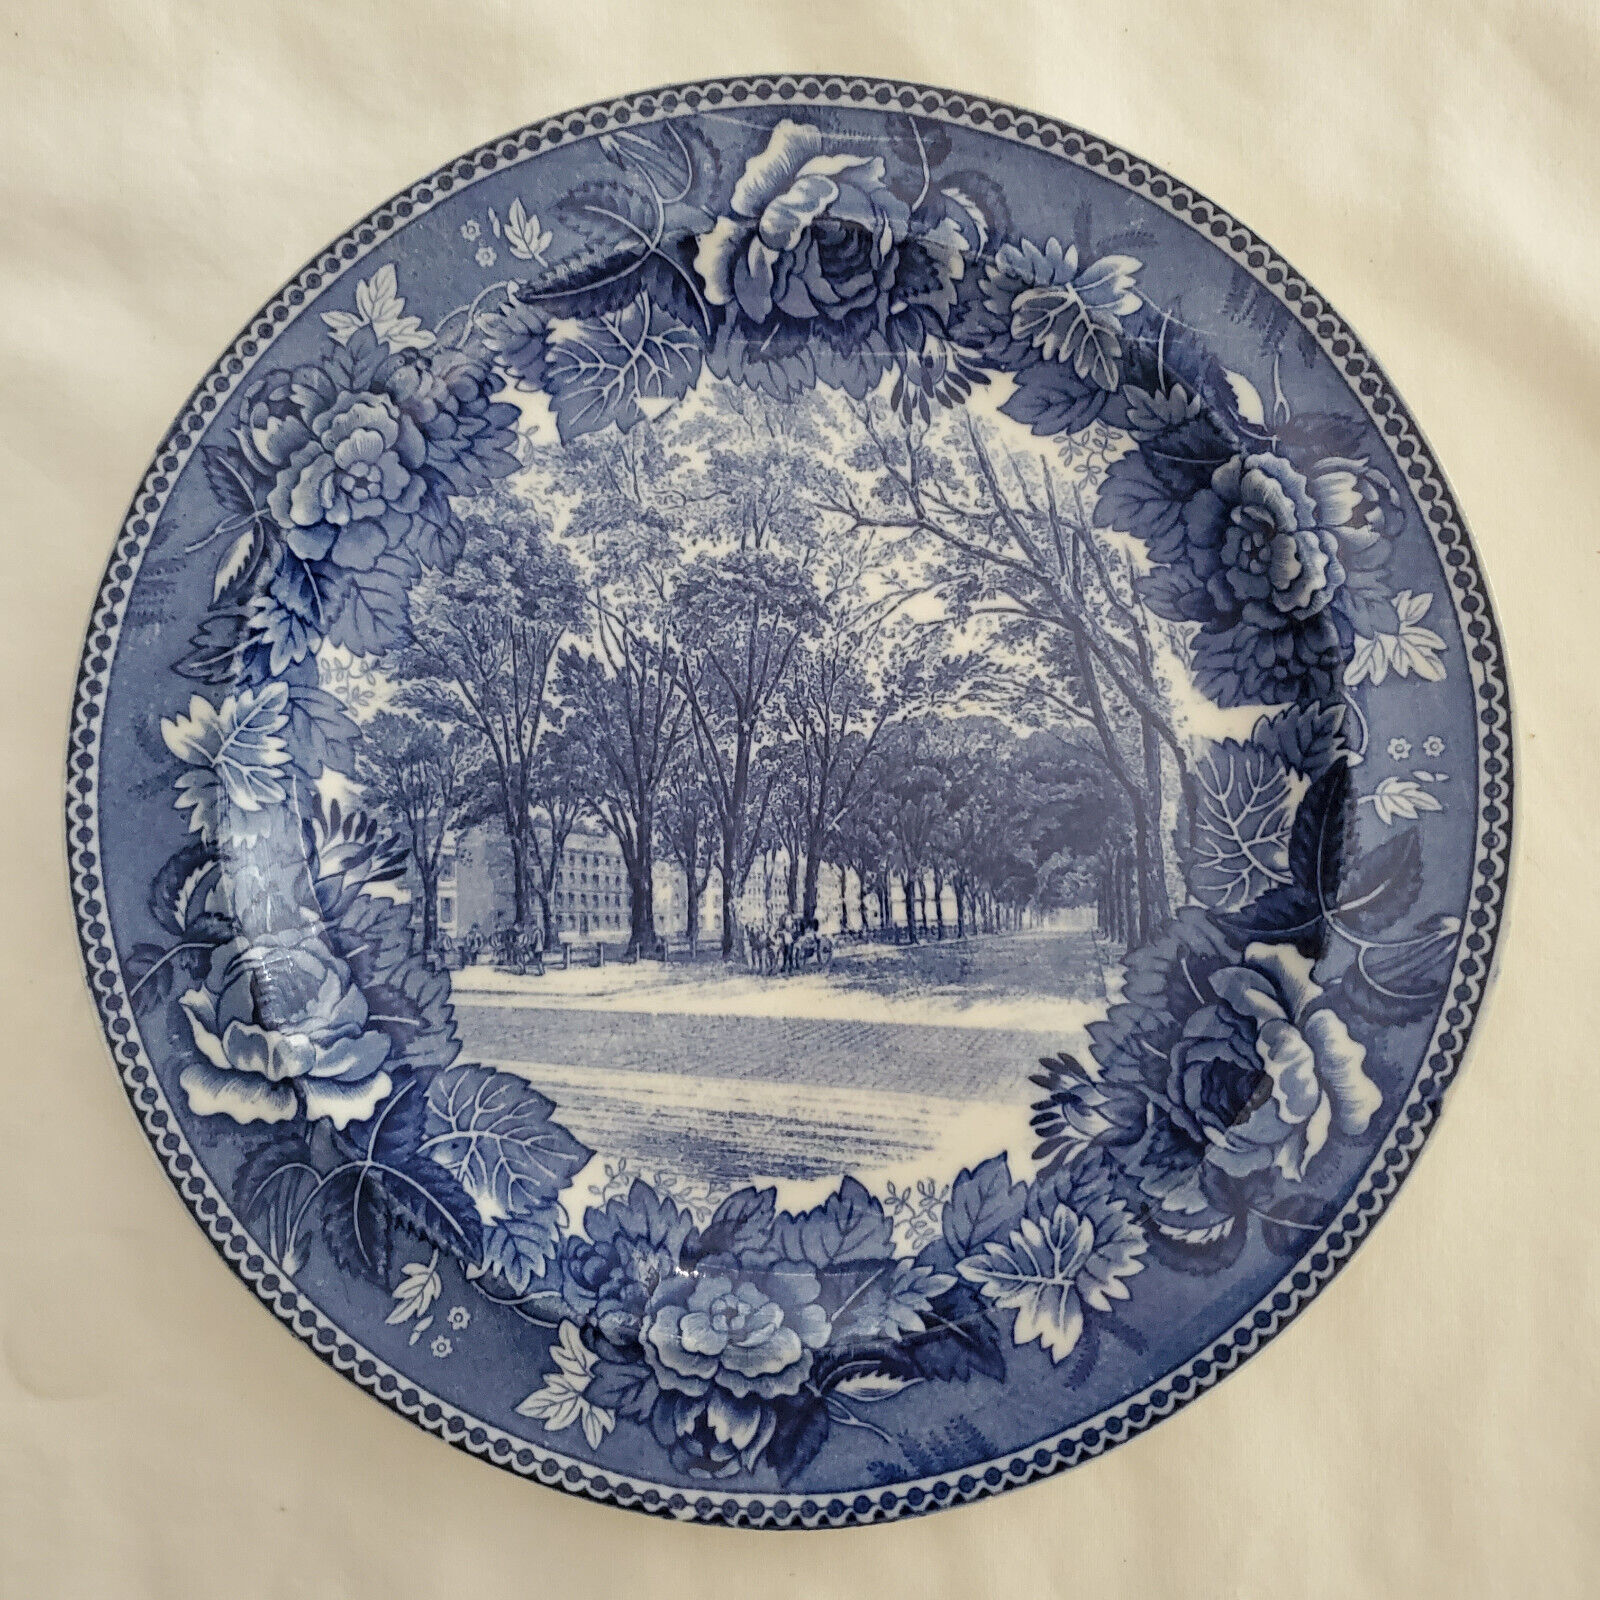 Yale University Antique Wedgwood Flow Blue Plate - Yale College - Exc. Cond.